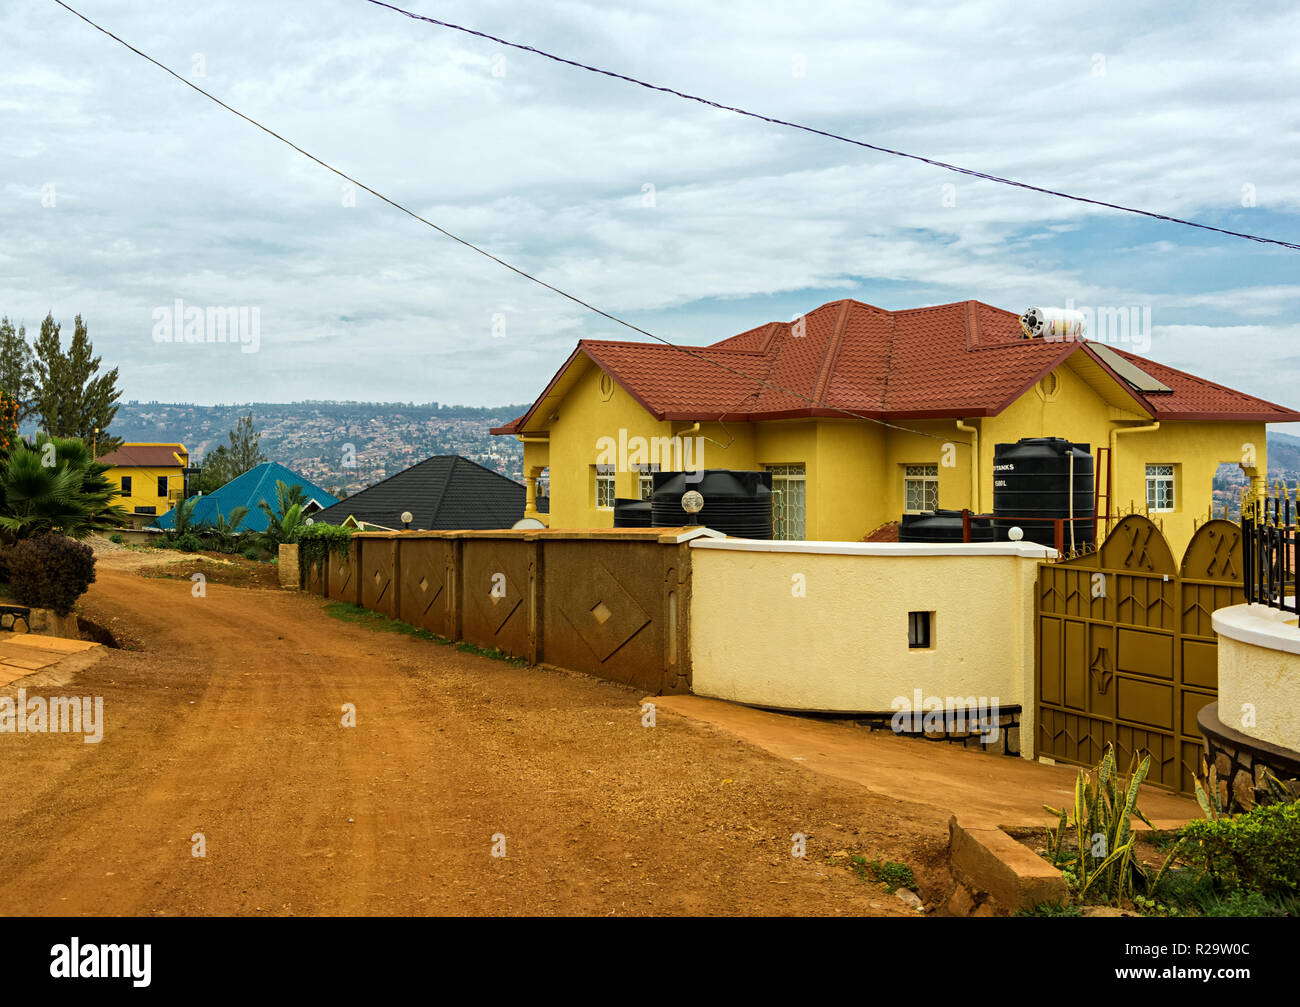 KIGALI,RWANDA - OCTOBER 18,2017: Gikondo This is the second and new building of Yambi Guesthouse in KK 722 Street.It has comfortable,clean rooms and a Stock Photo